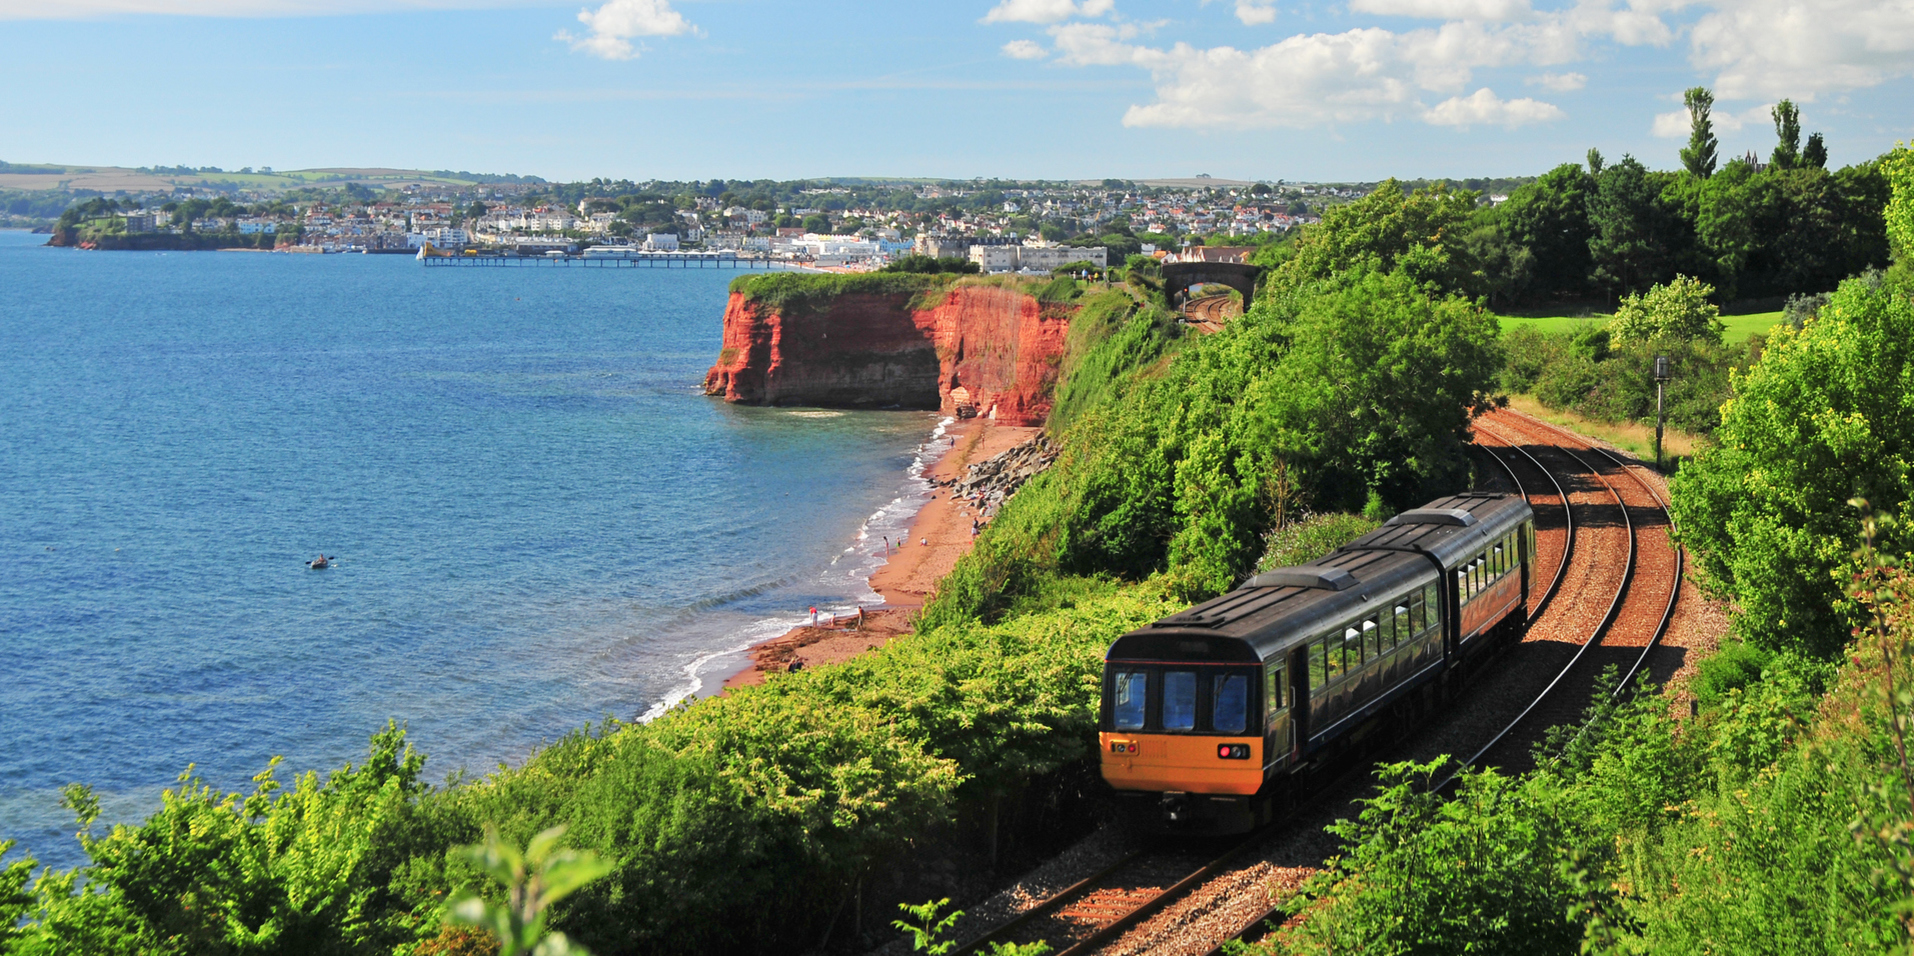 Torquay seafront with a train on the tracks at the bottom